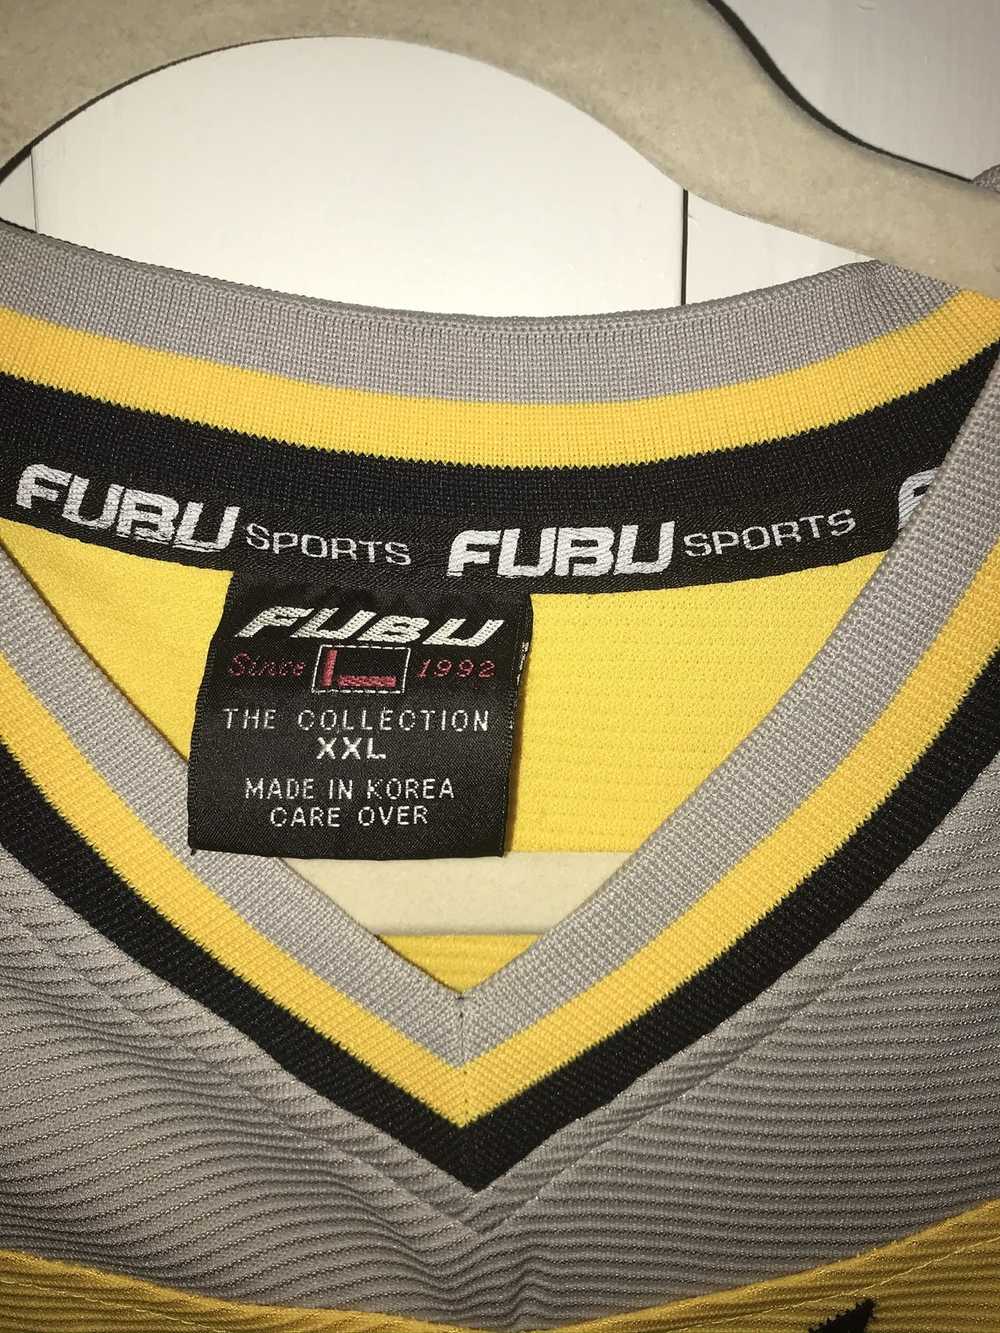 Fubu Jersey from 2005 collection - image 6